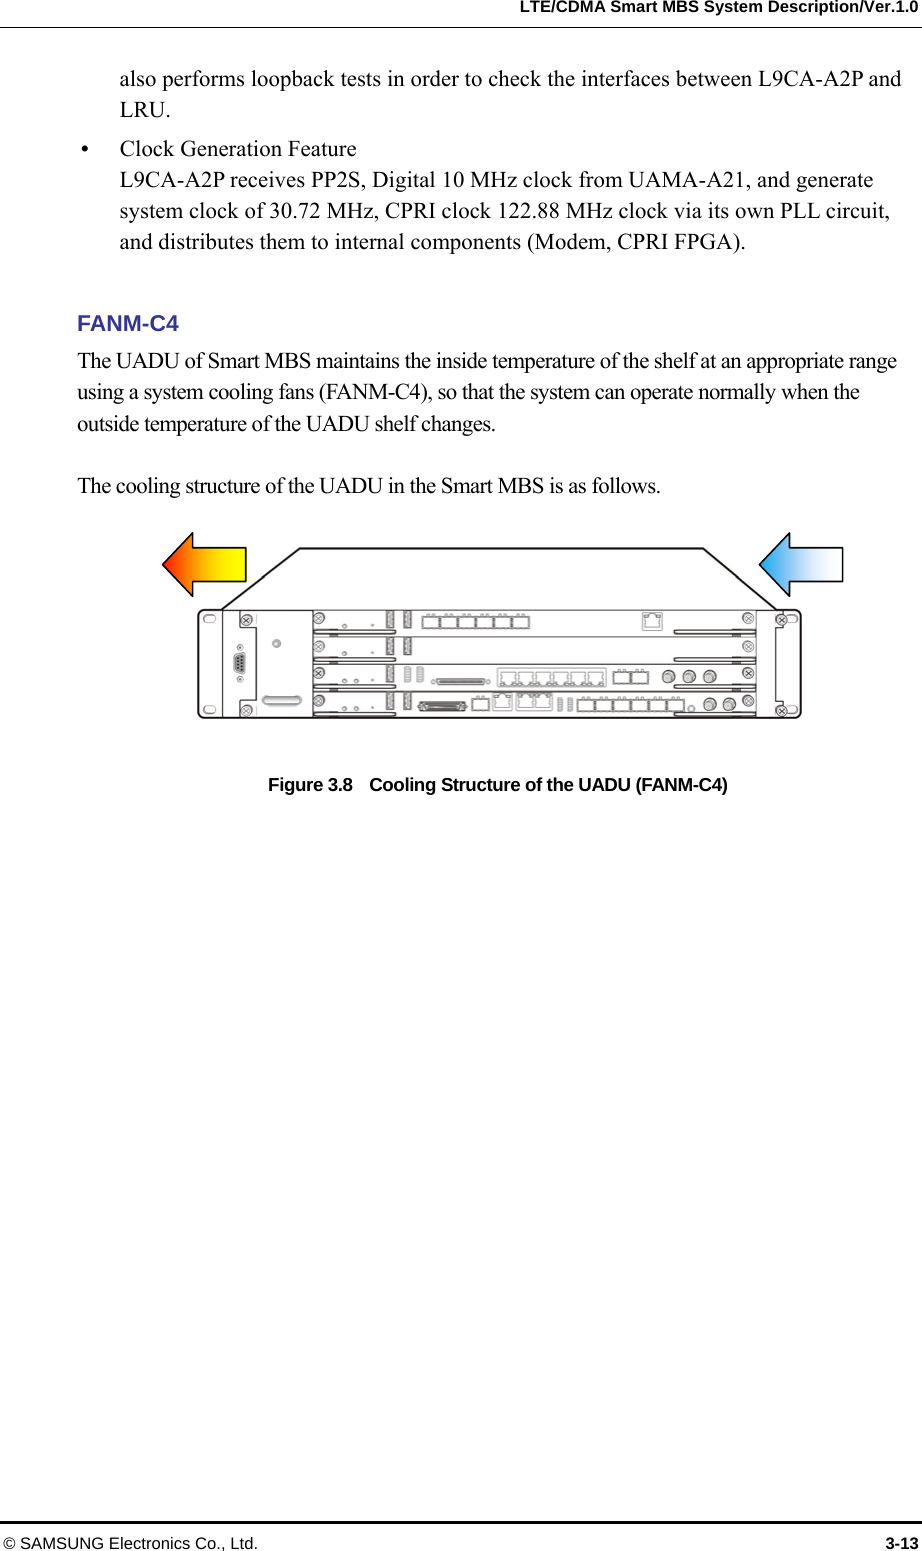   LTE/CDMA Smart MBS System Description/Ver.1.0 © SAMSUNG Electronics Co., Ltd.  3-13 also performs loopback tests in order to check the interfaces between L9CA-A2P and LRU.  Clock Generation Feature L9CA-A2P receives PP2S, Digital 10 MHz clock from UAMA-A21, and generate system clock of 30.72 MHz, CPRI clock 122.88 MHz clock via its own PLL circuit, and distributes them to internal components (Modem, CPRI FPGA).  FANM-C4 The UADU of Smart MBS maintains the inside temperature of the shelf at an appropriate range using a system cooling fans (FANM-C4), so that the system can operate normally when the outside temperature of the UADU shelf changes.  The cooling structure of the UADU in the Smart MBS is as follows.   Figure 3.8    Cooling Structure of the UADU (FANM-C4)  